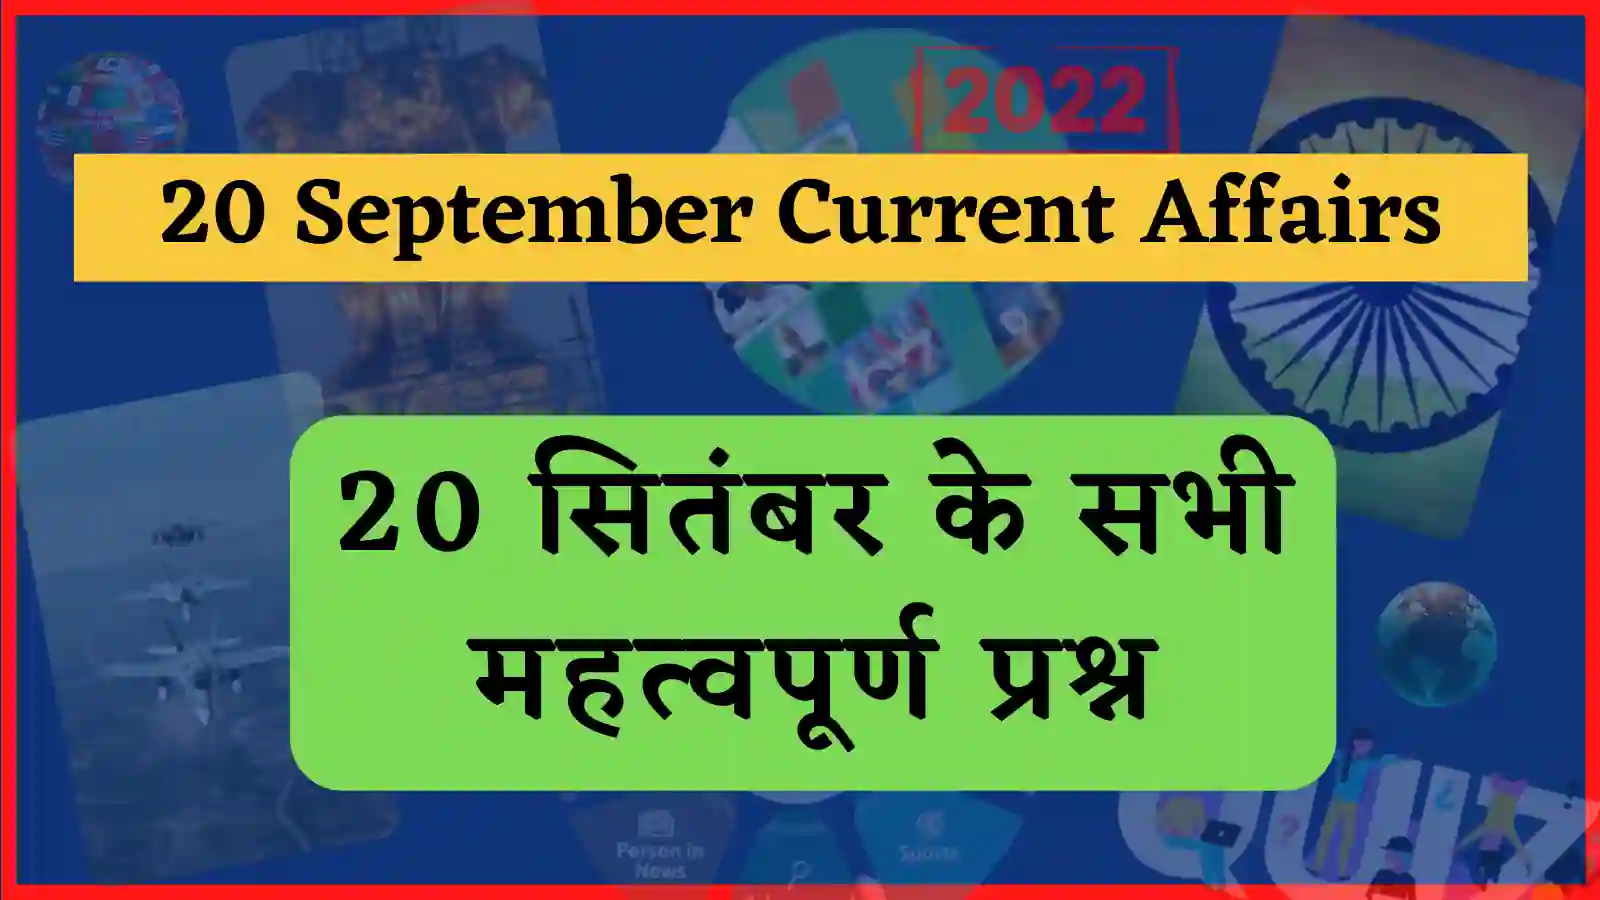 20 September 2022 Current Affairs in Hindi